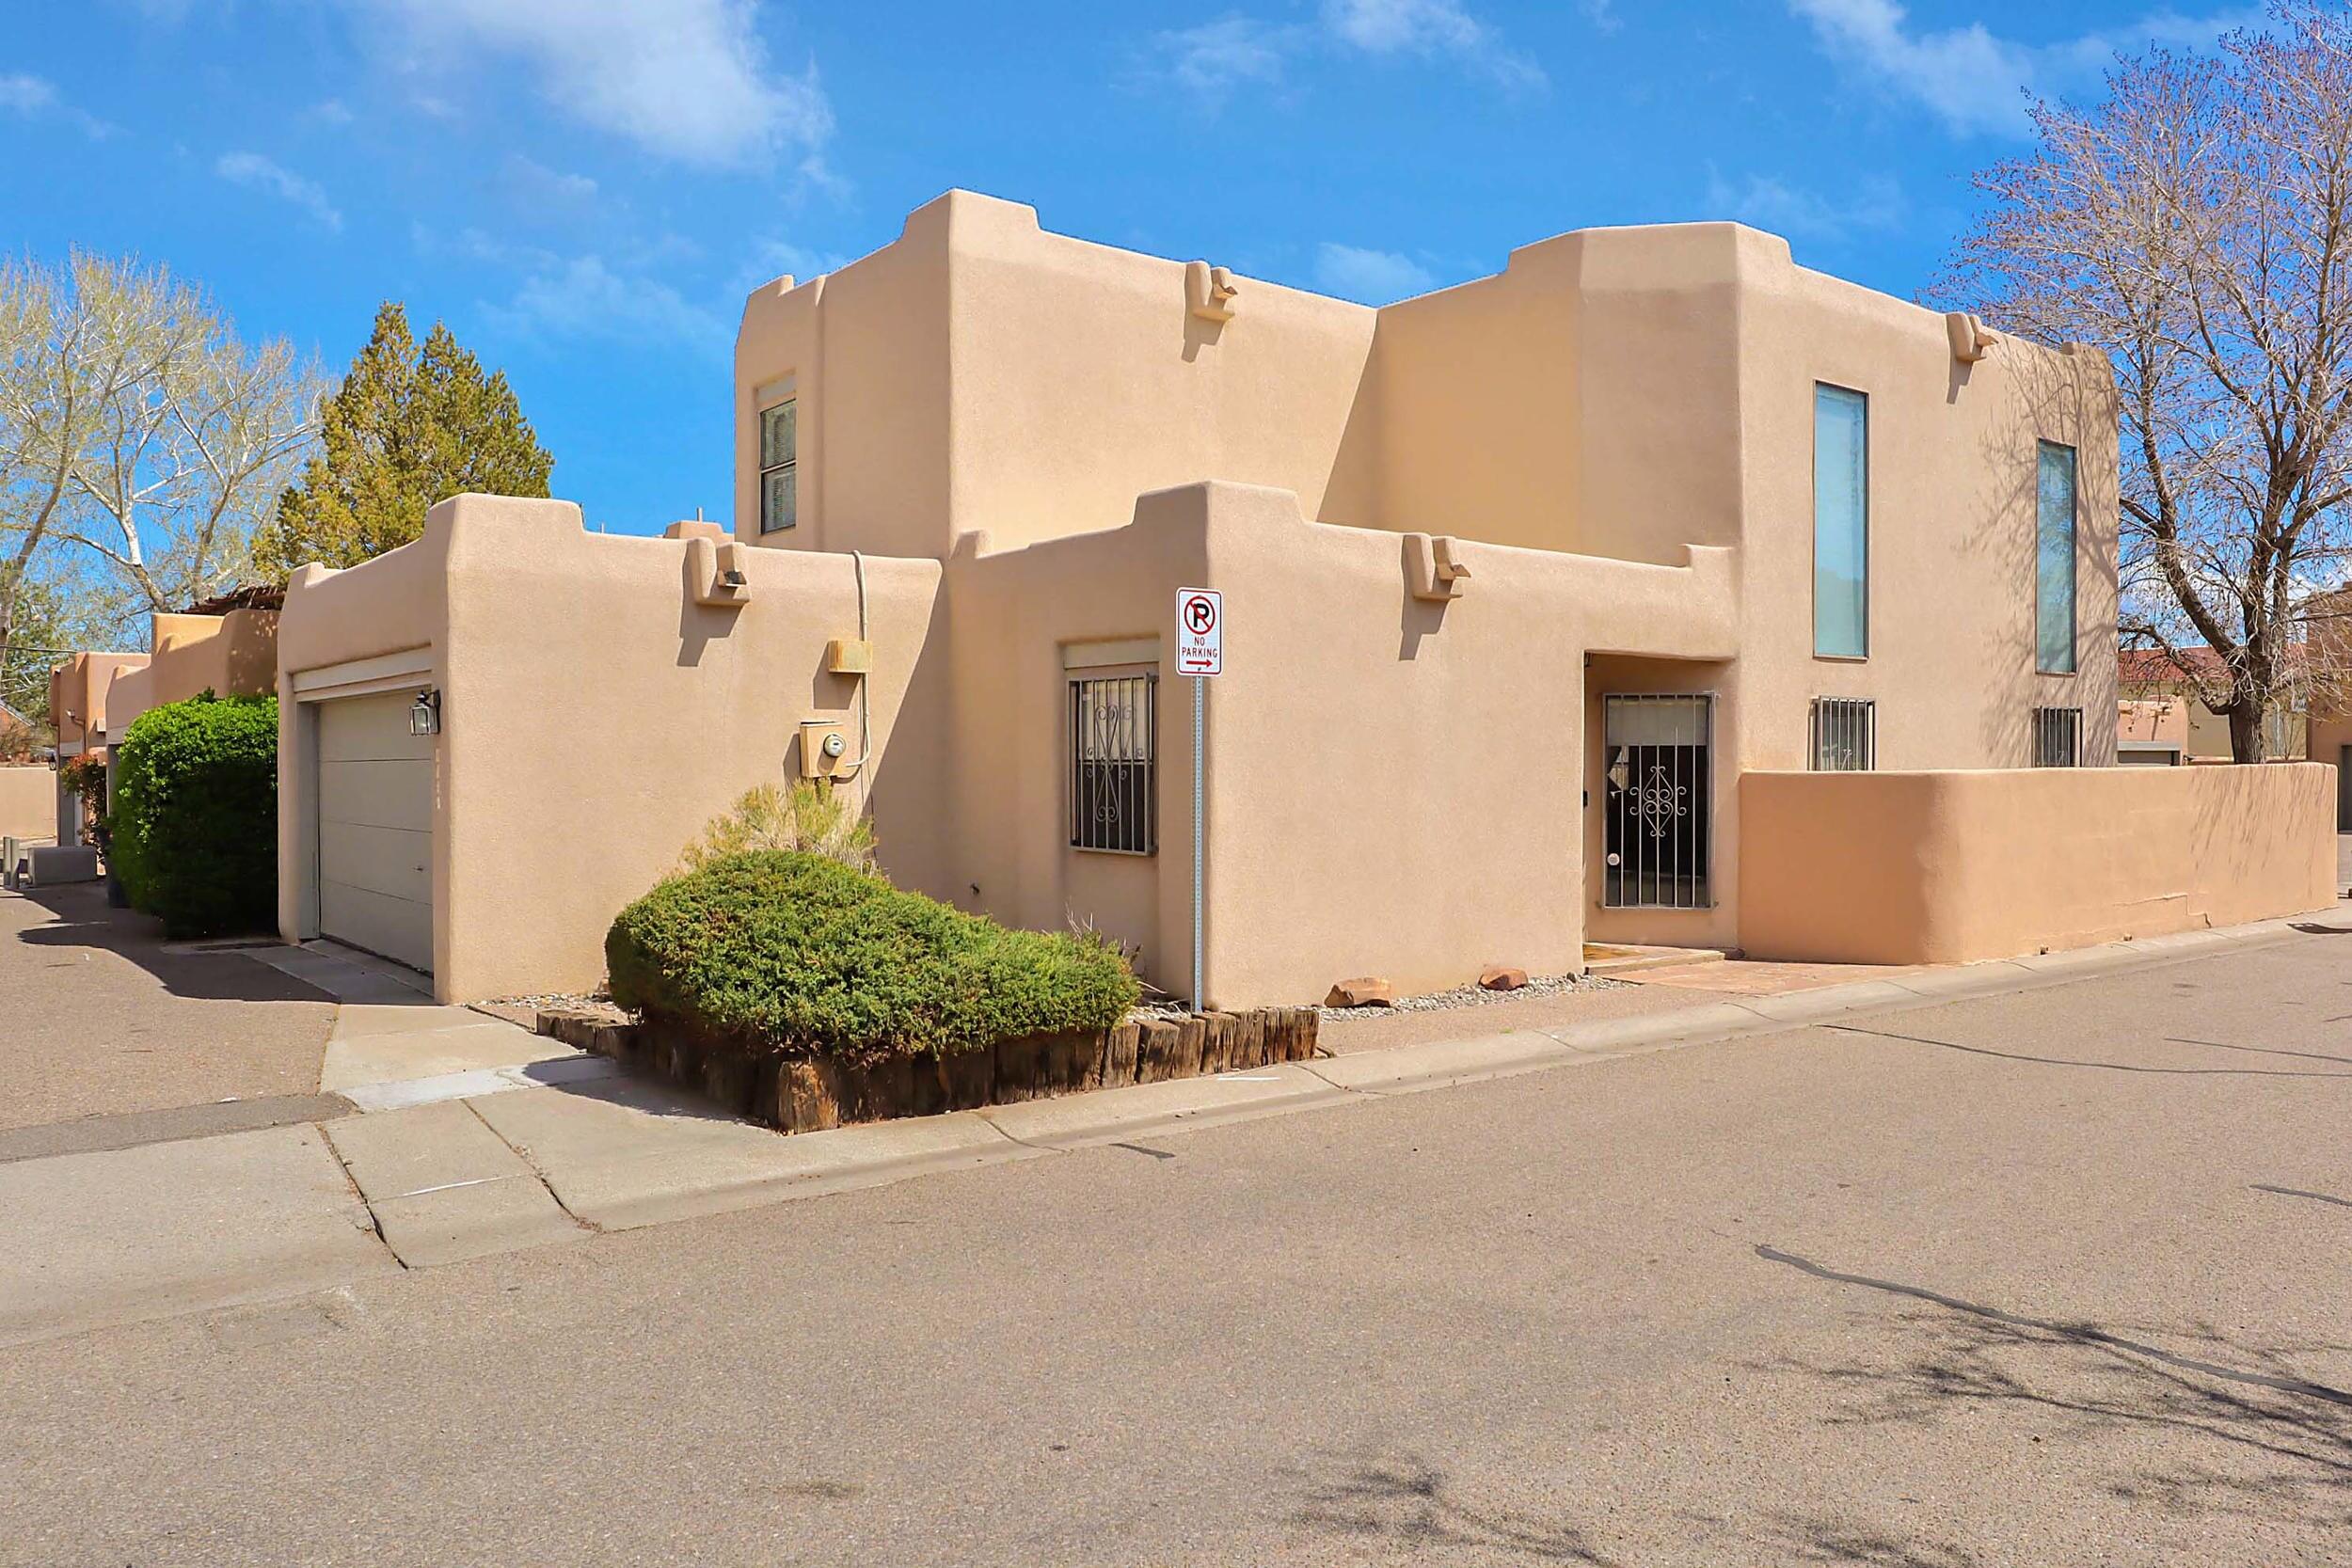 Pueblo Style townhouse in the heart of downtown. Quick access to I-40 and all the convenience of the west side and east side of Albuquerque. Urban living at its best. Saw Mill Market Place, Old Town, Museums, biking and walking trails all within walking distance from the town home community. Primary suite on ground level with a guest bedroom upstairs. Plus a large loft that can be used as another bedroom, hobby room, media room or a workout space. Lots of options. Enjoy morning coffee from the deck and two private courtyards. Low maintenance yard areas. Come see this lovely property today.